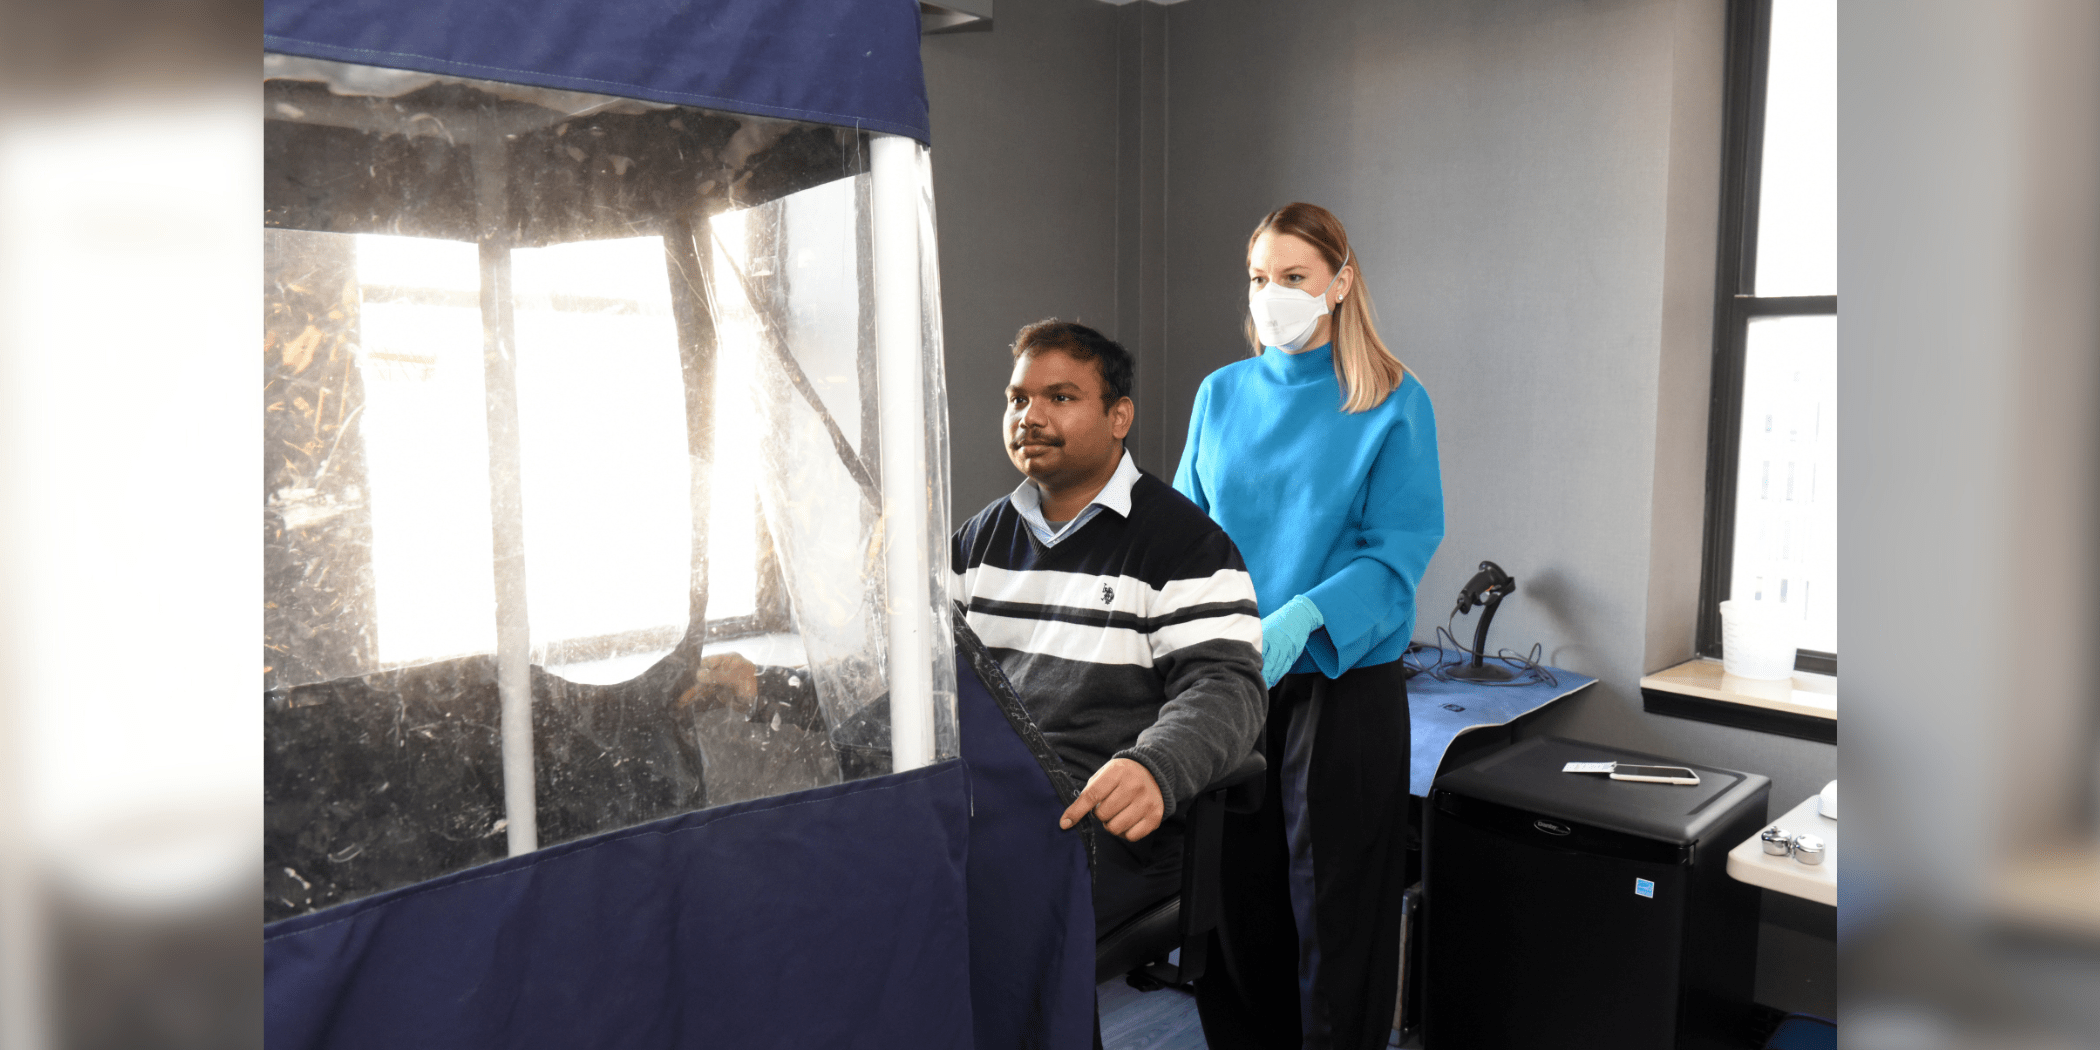 Woman helps man into breathing test